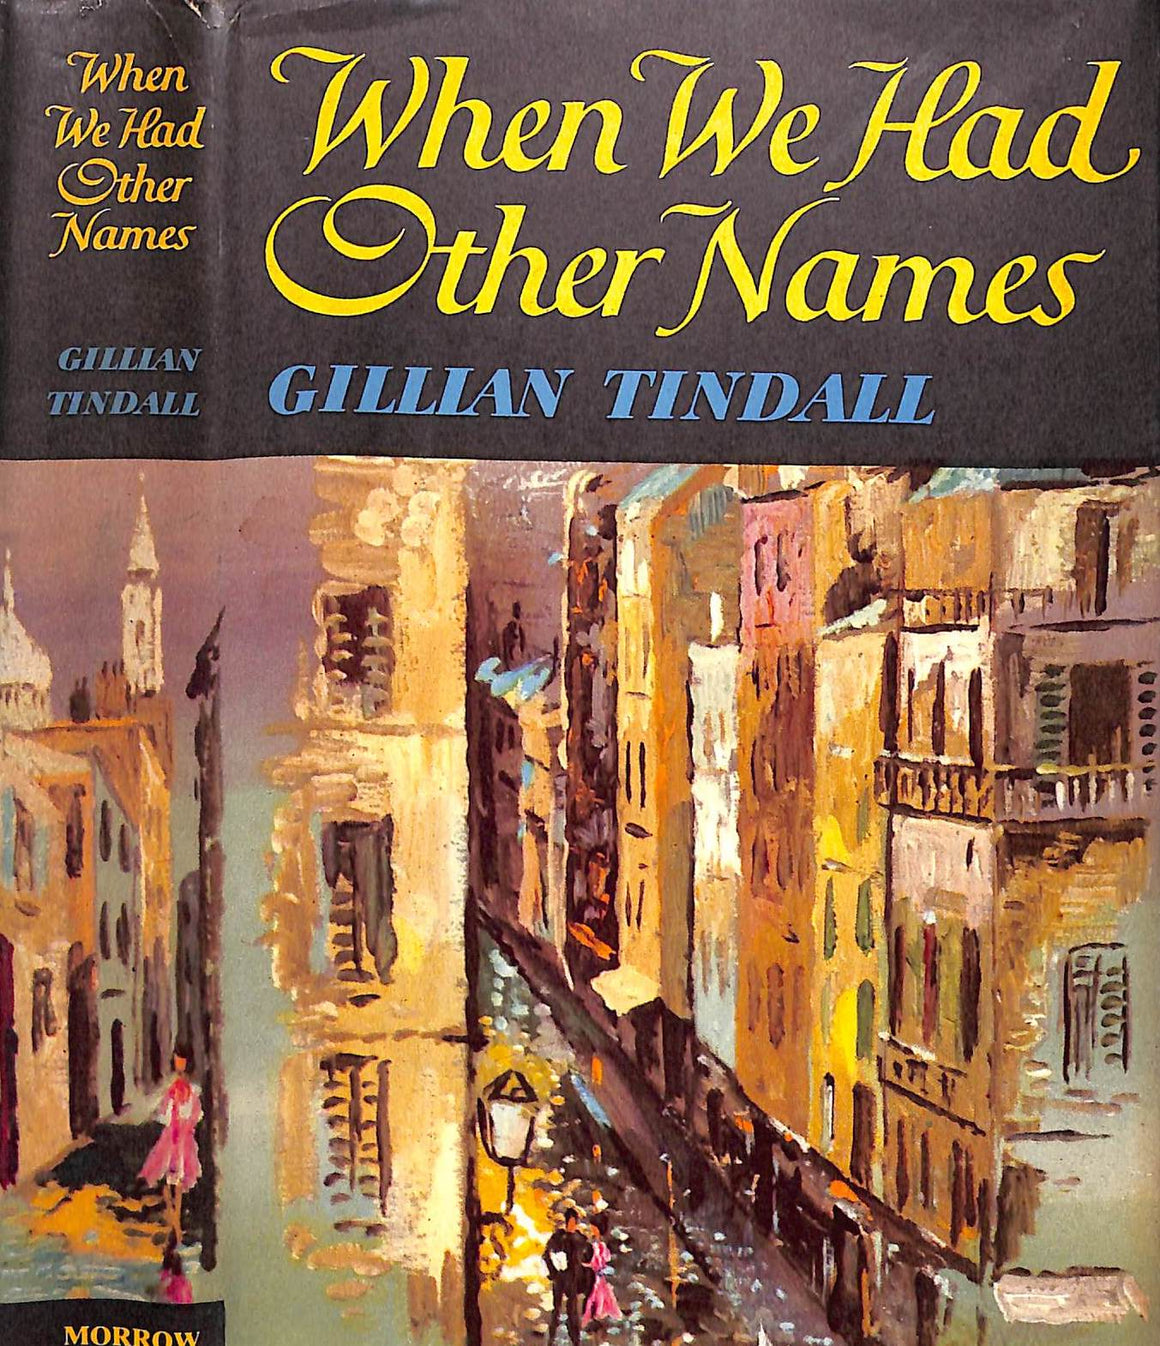 "When We Had Other Names" 1960 TINDALL, Gillian